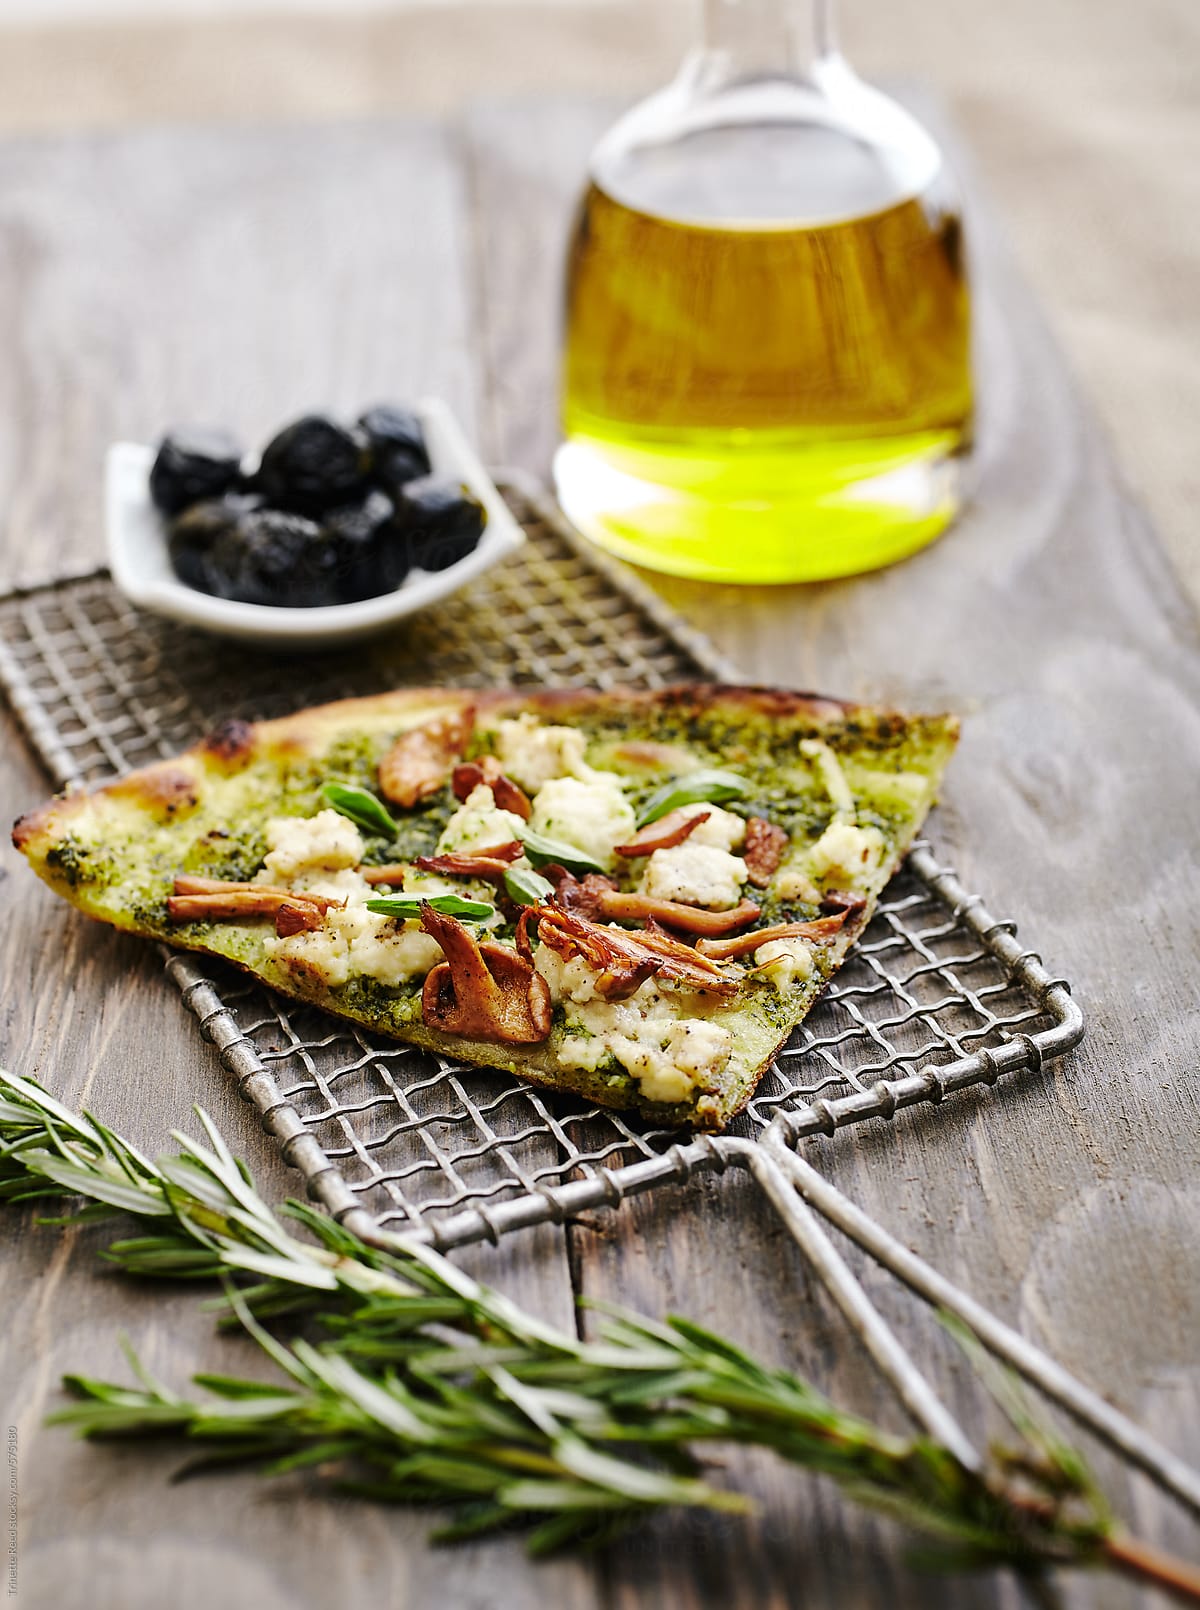 Pizza with olive oil, rosemary and olives